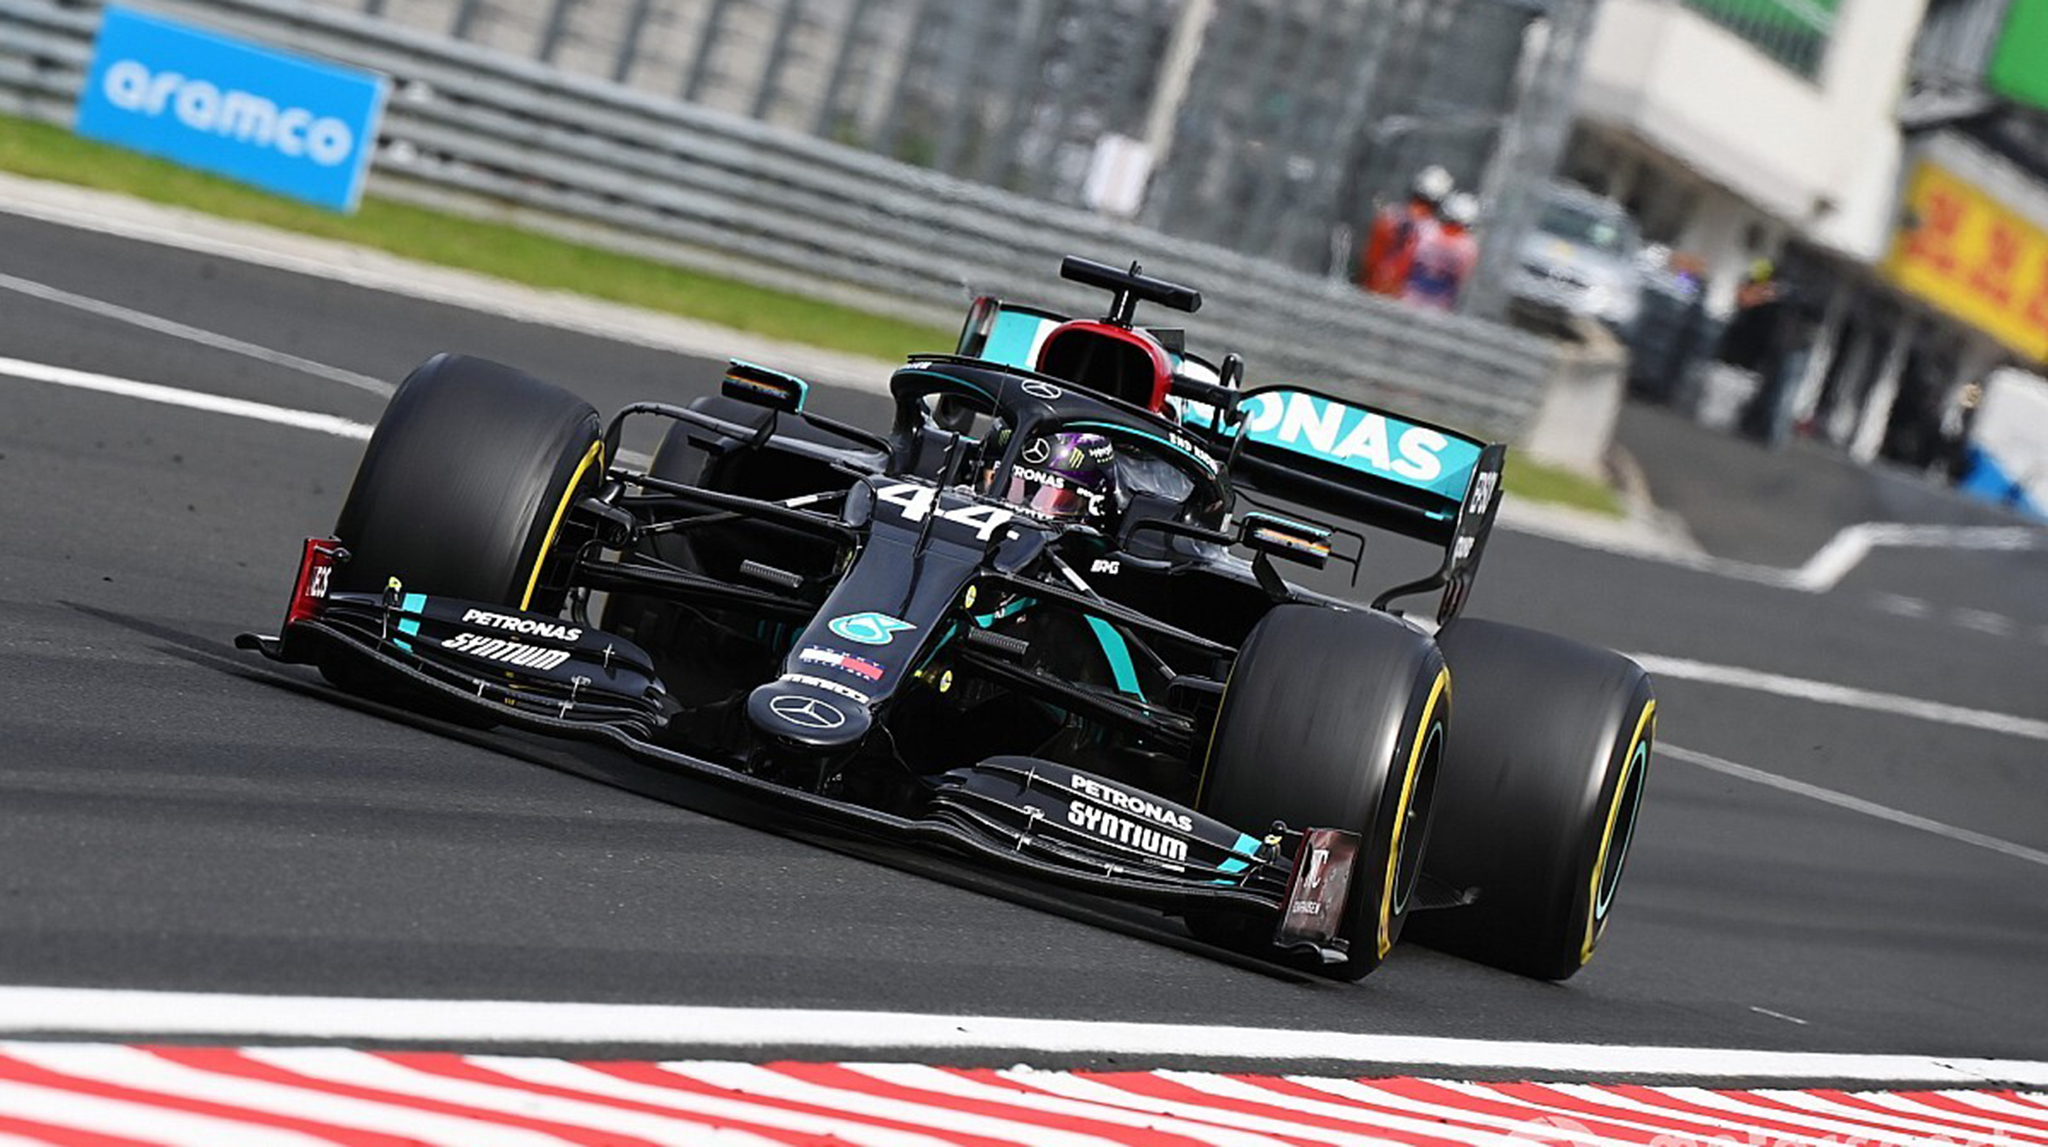 Race 3 F1 2020 results: Mercedes demonstrates strength with lewis-hamilton-mercedes-f1-w11-1.jpg